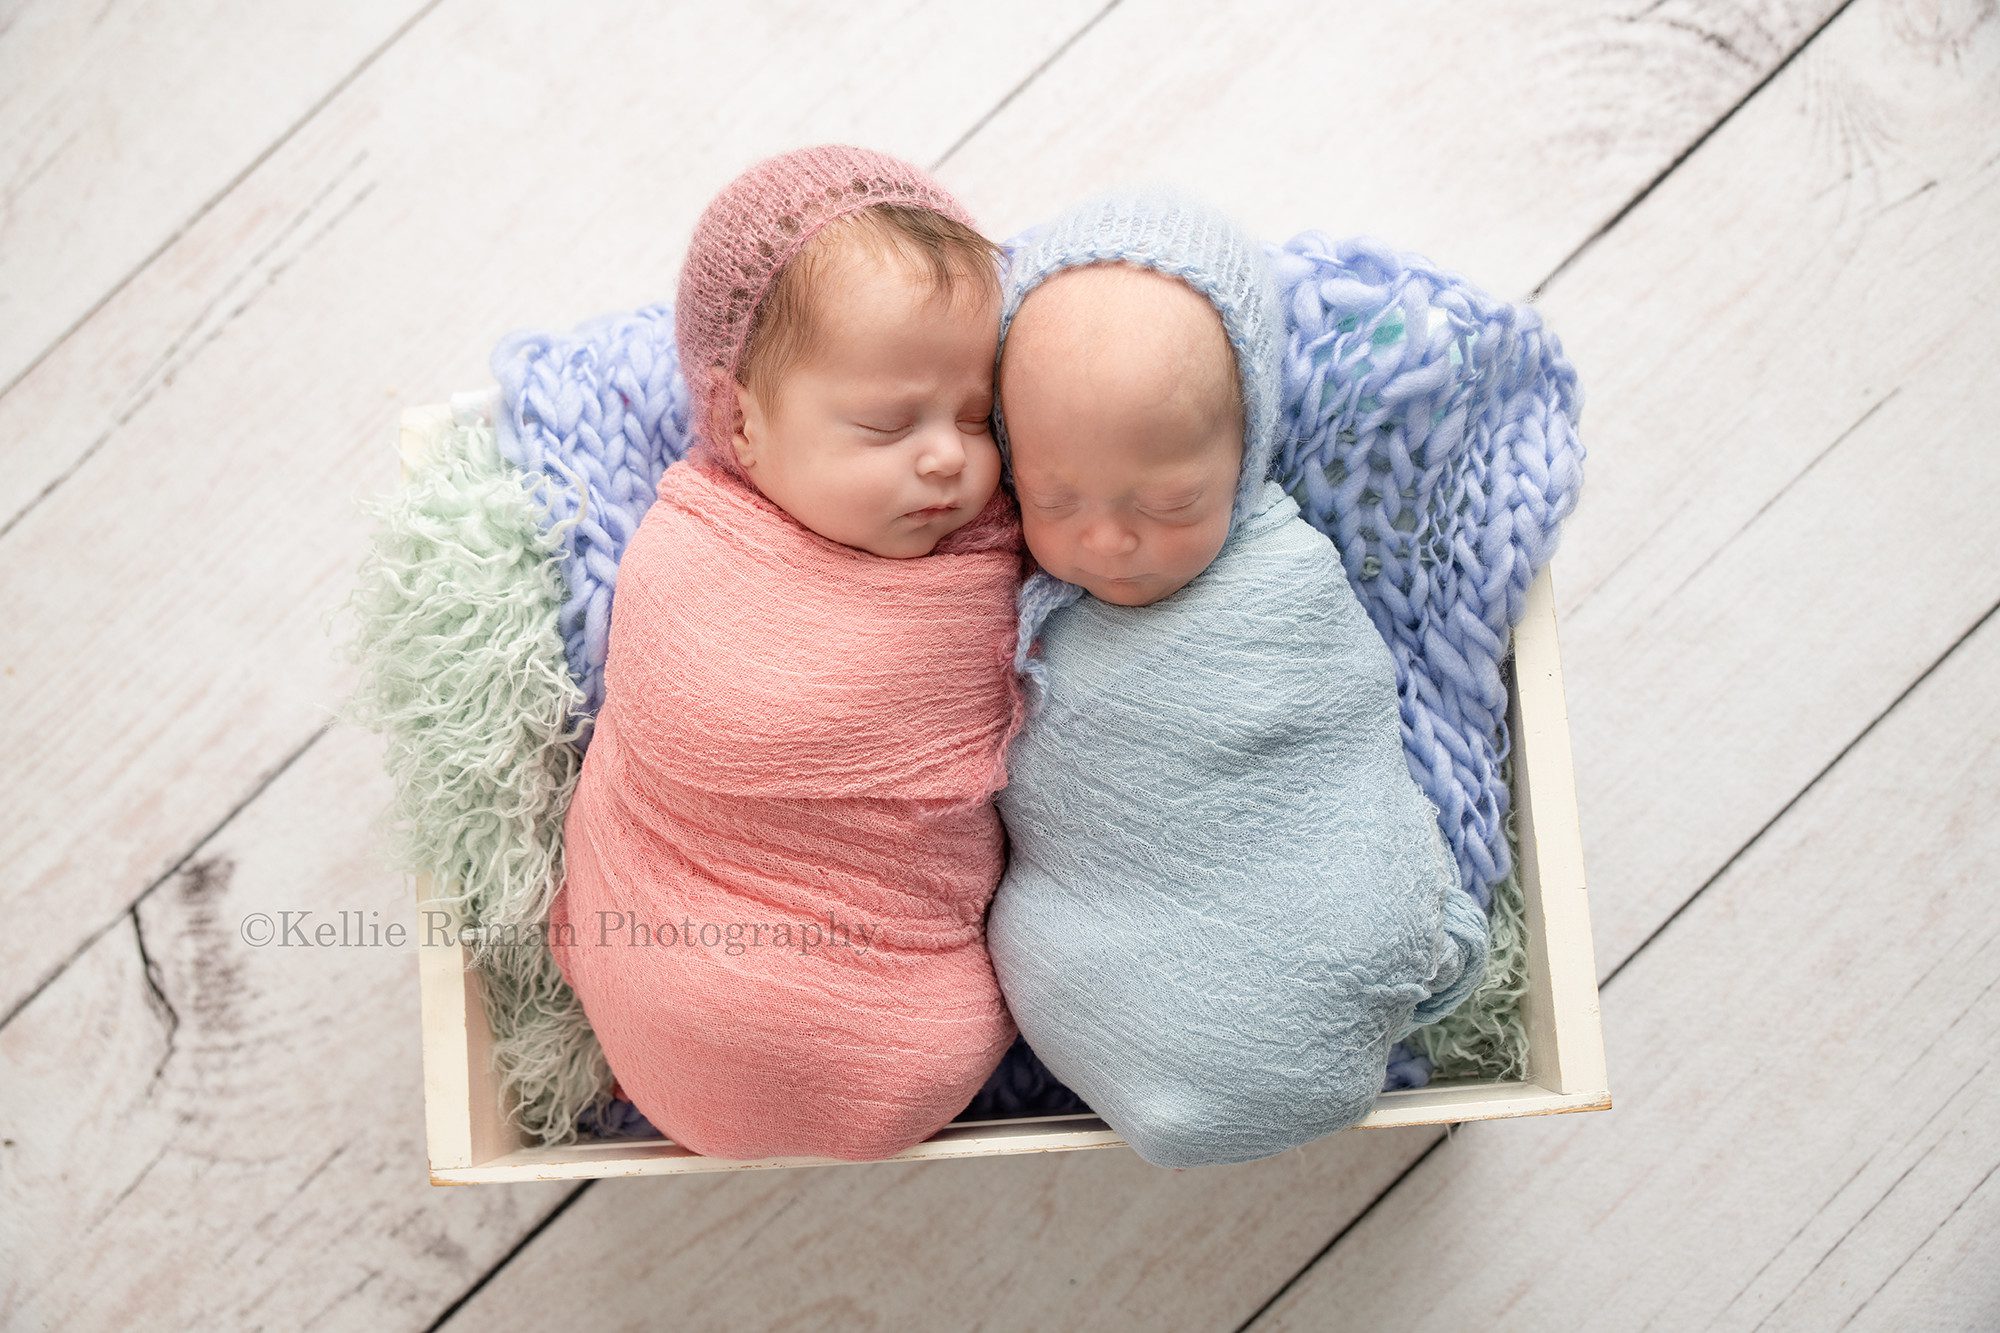 milwaukee twins two newborns one boy and one girl in milwaukee photography studio the girl is wrapped in a pink swaddle with a pink bonnet on the boy is wrapped in a blue swaddle with a blue bonnet on they are sleeping in a white wood crate with teal fur inside of it